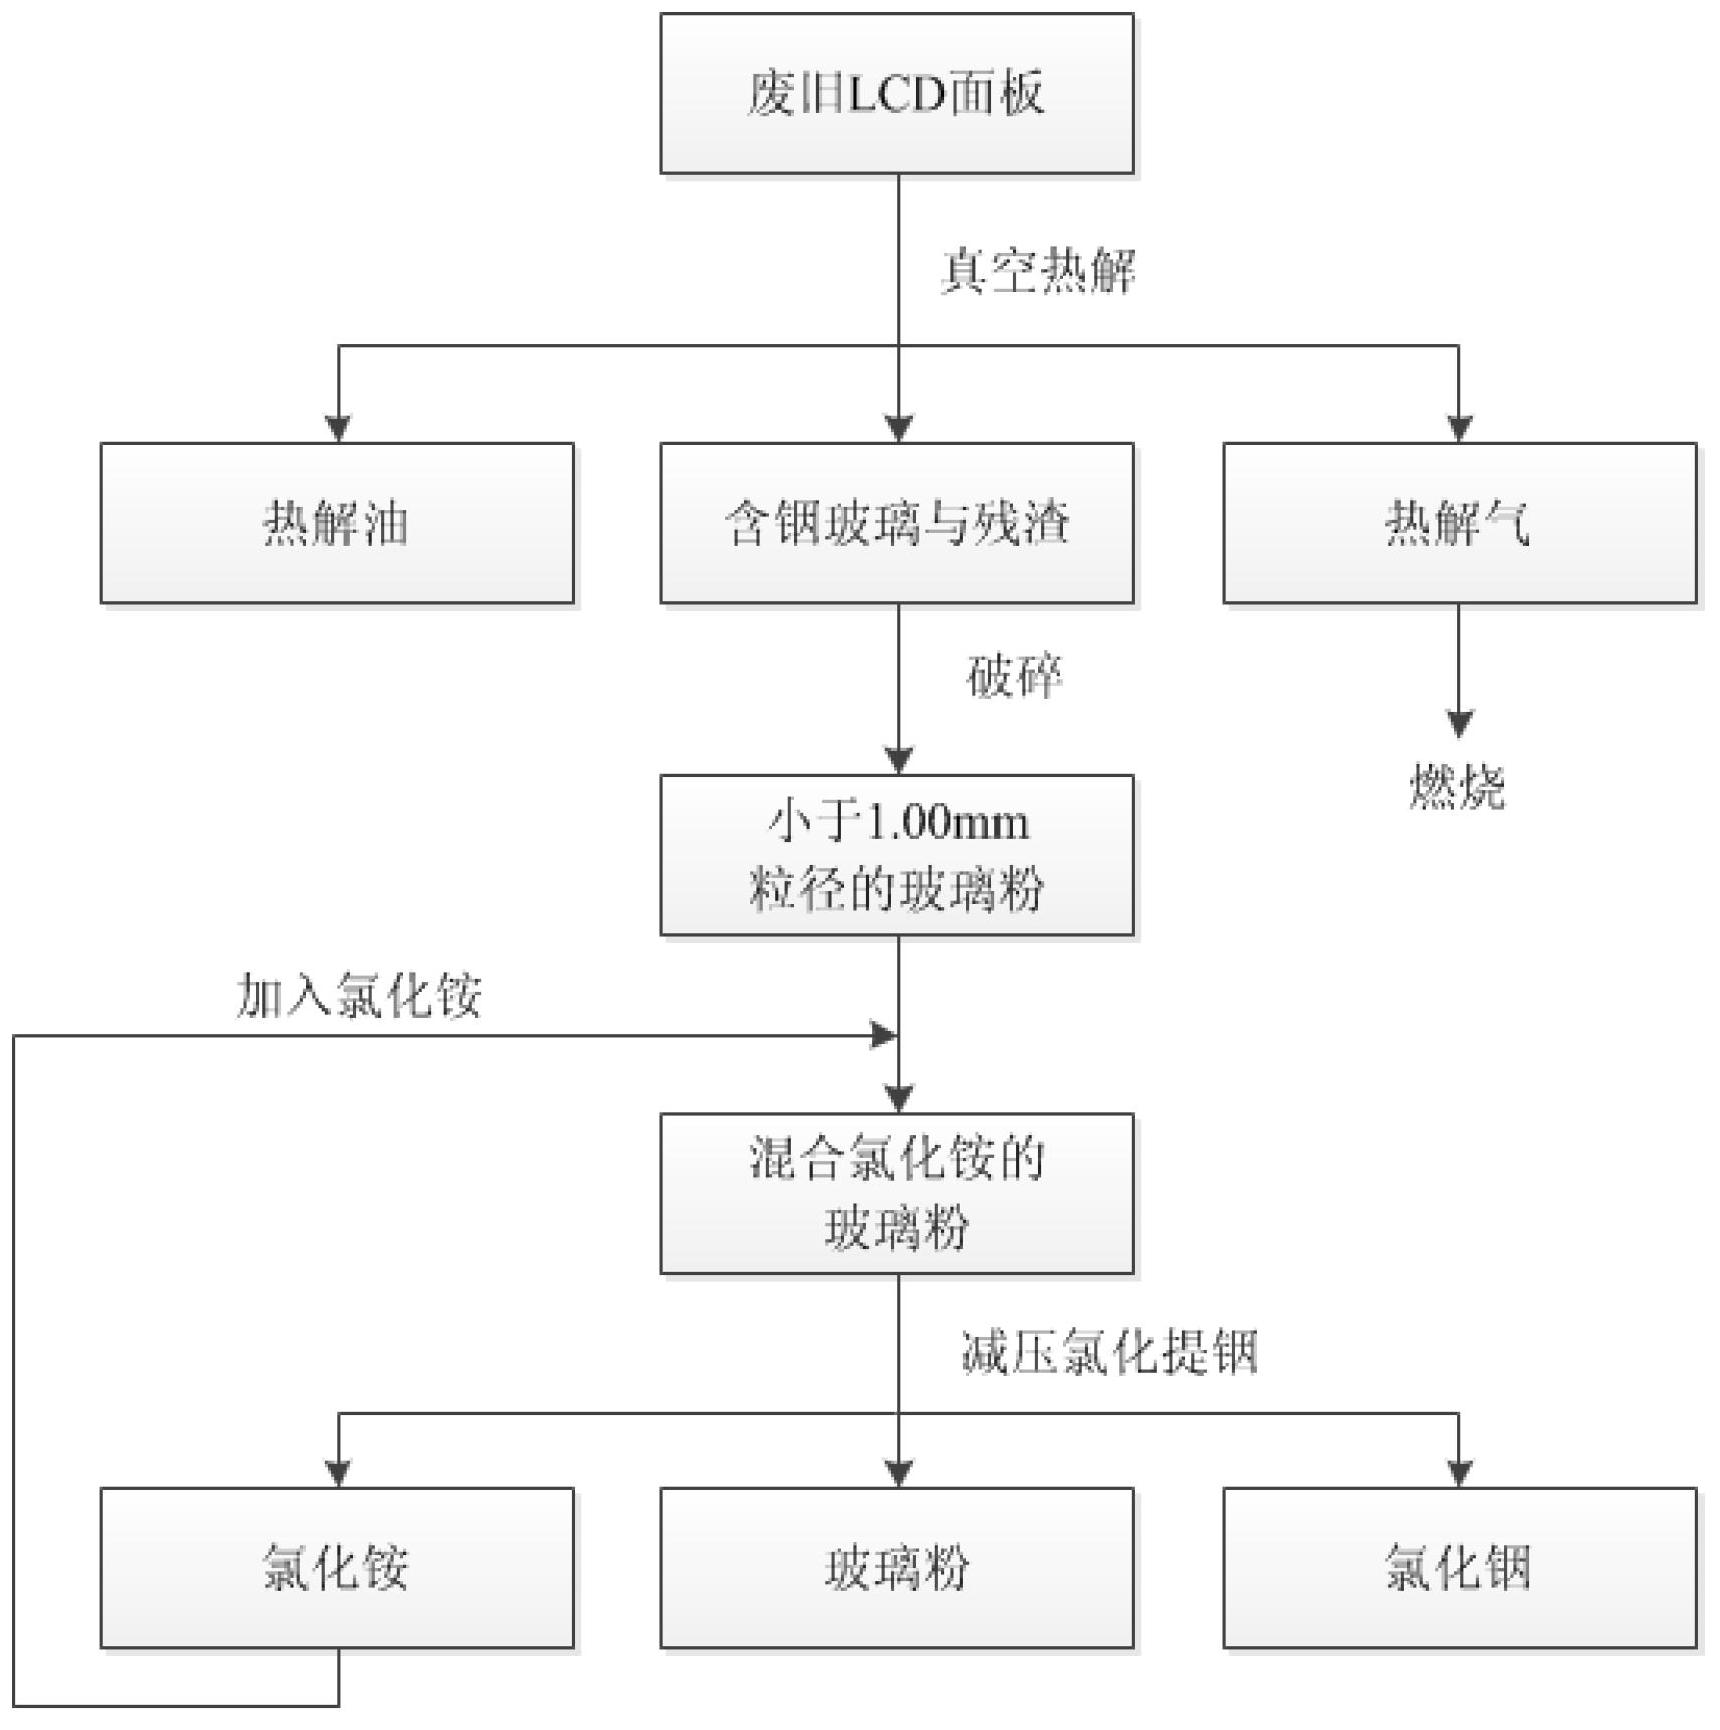 Waste liquid crystal display panel treatment and resource recycling method